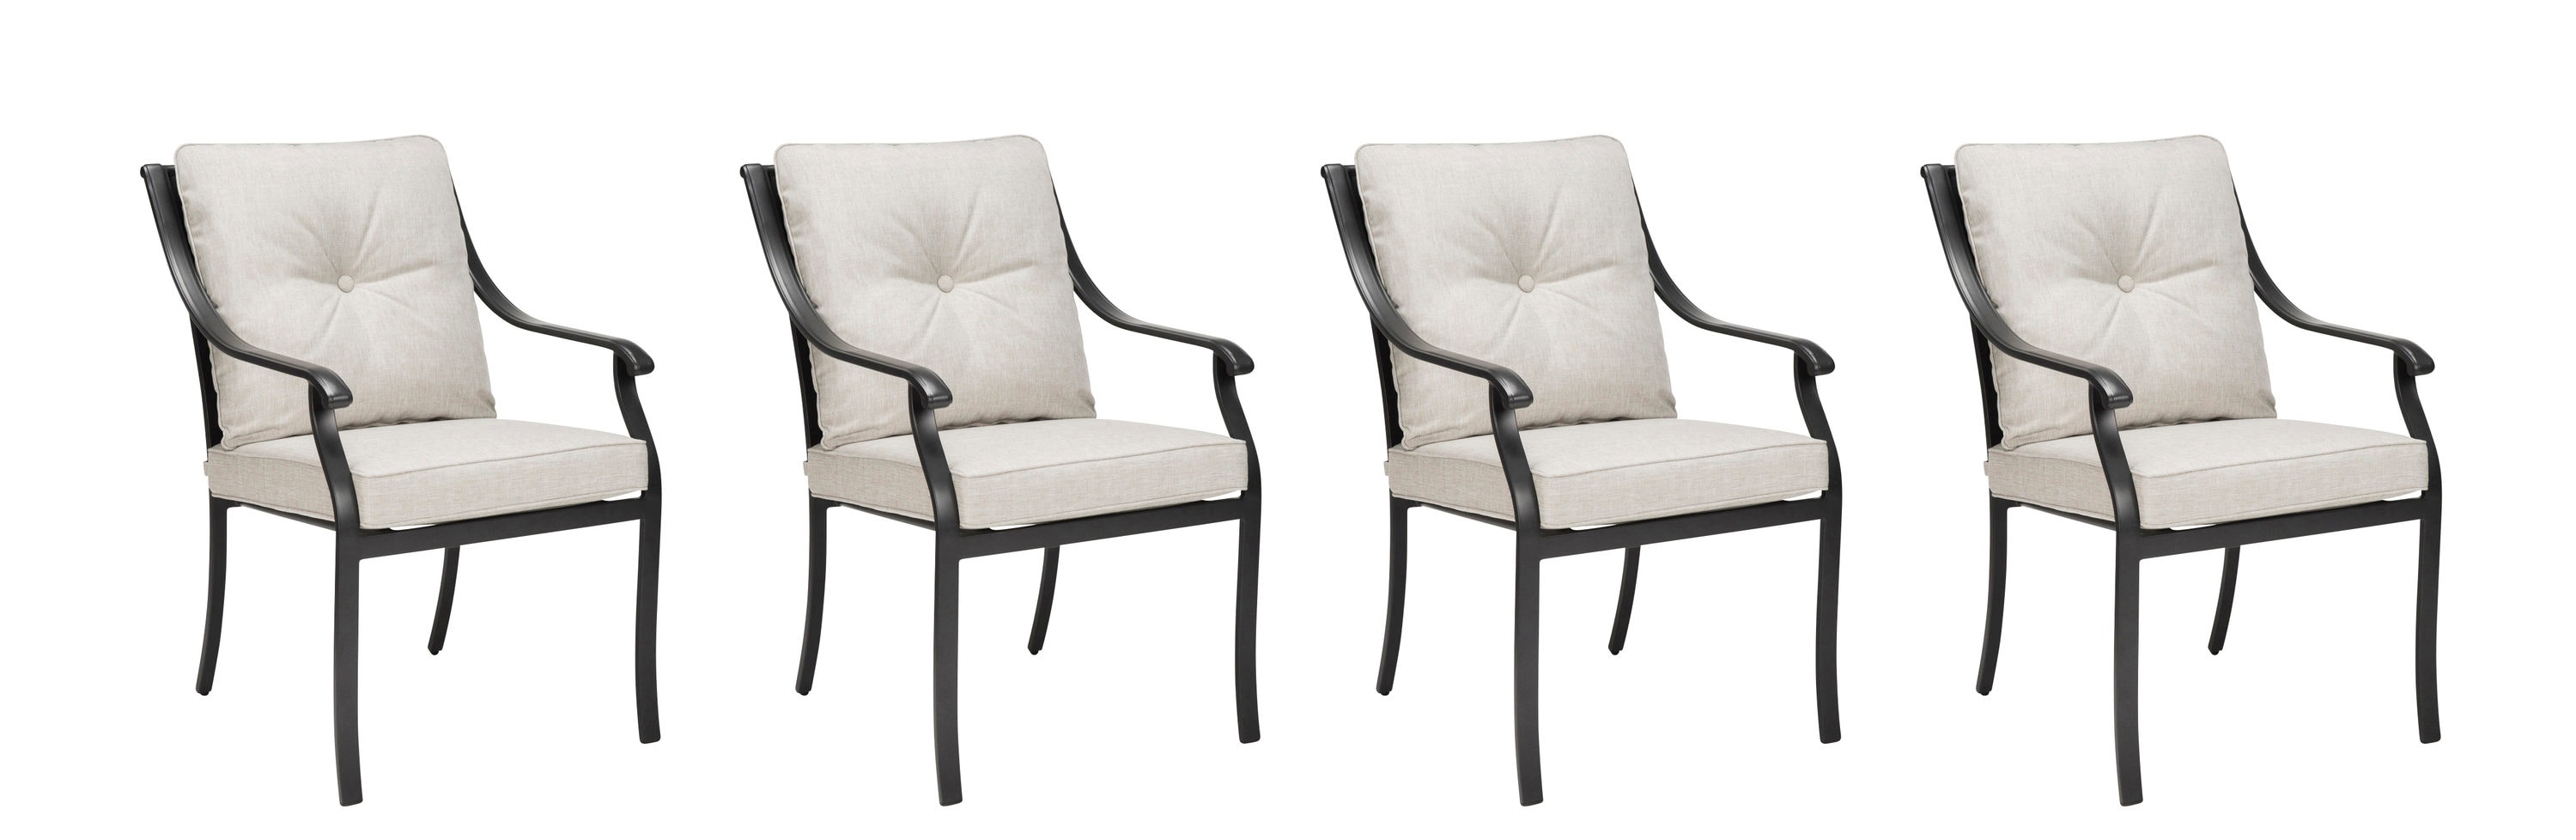 Style Selections Elliot Creek Set Of 4, Grey Dining Chairs Set Of 4 With Arms